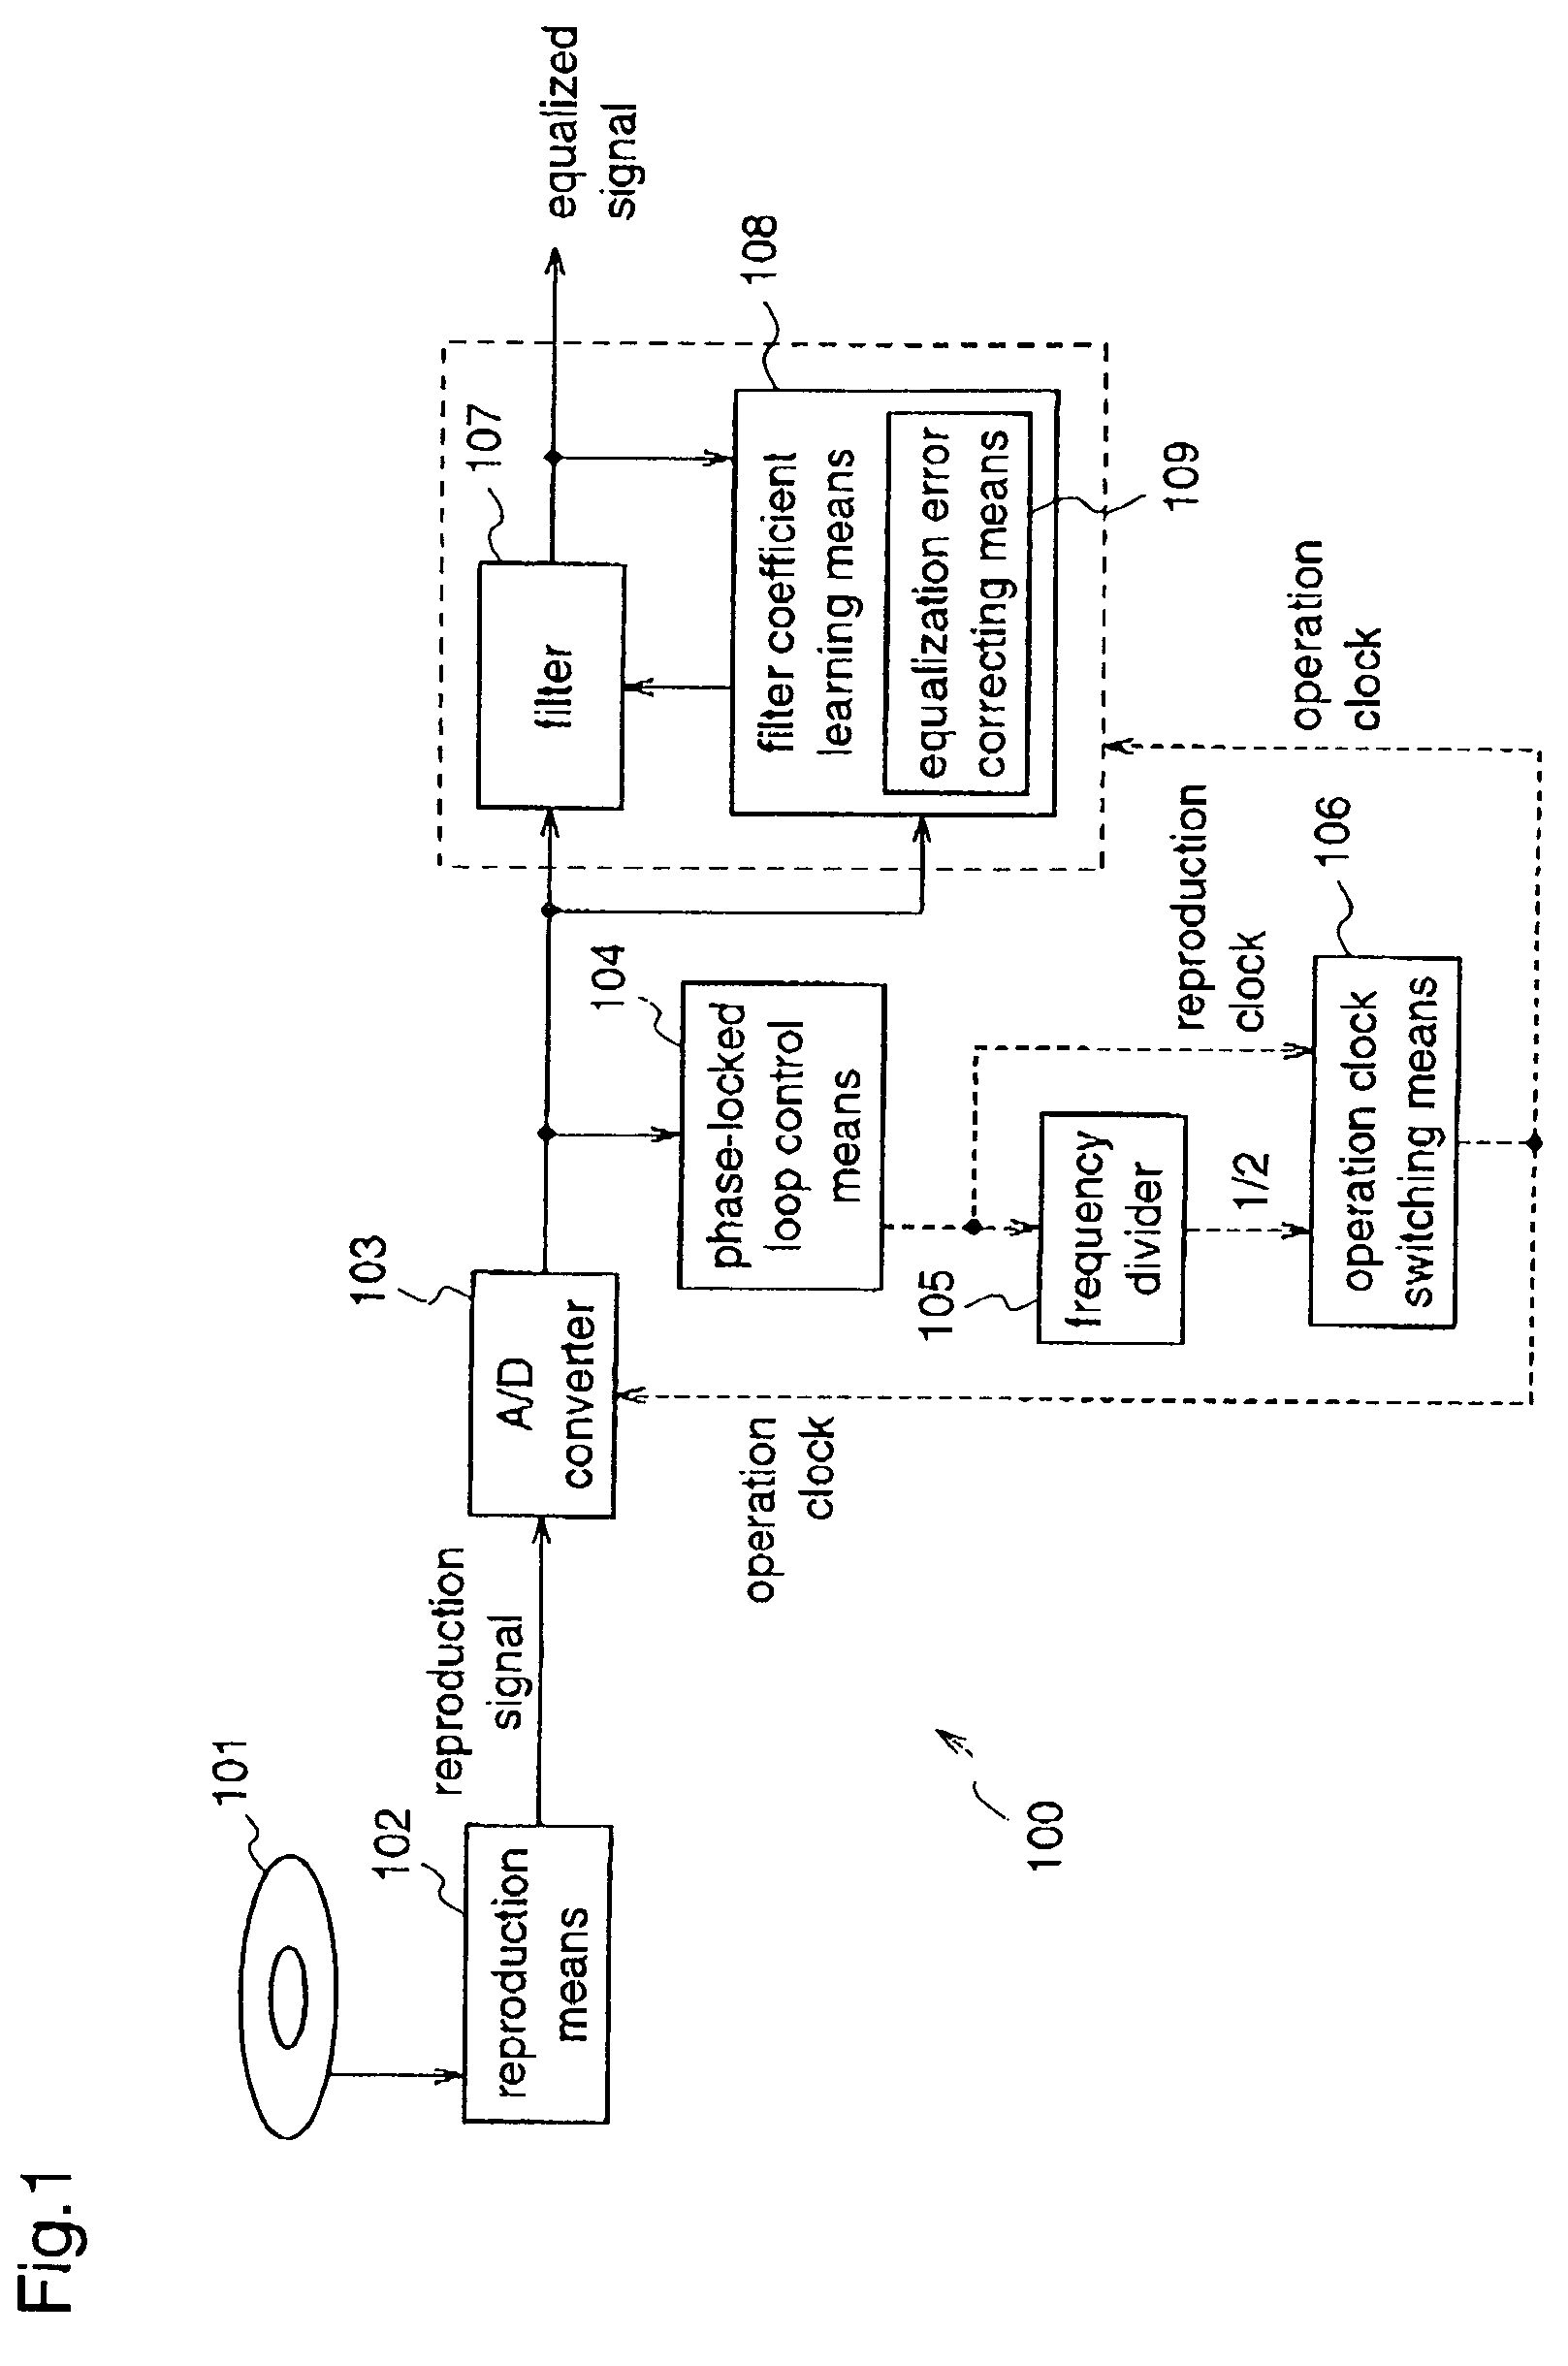 Reproduction signal processing apparatus and optical disc player including the same